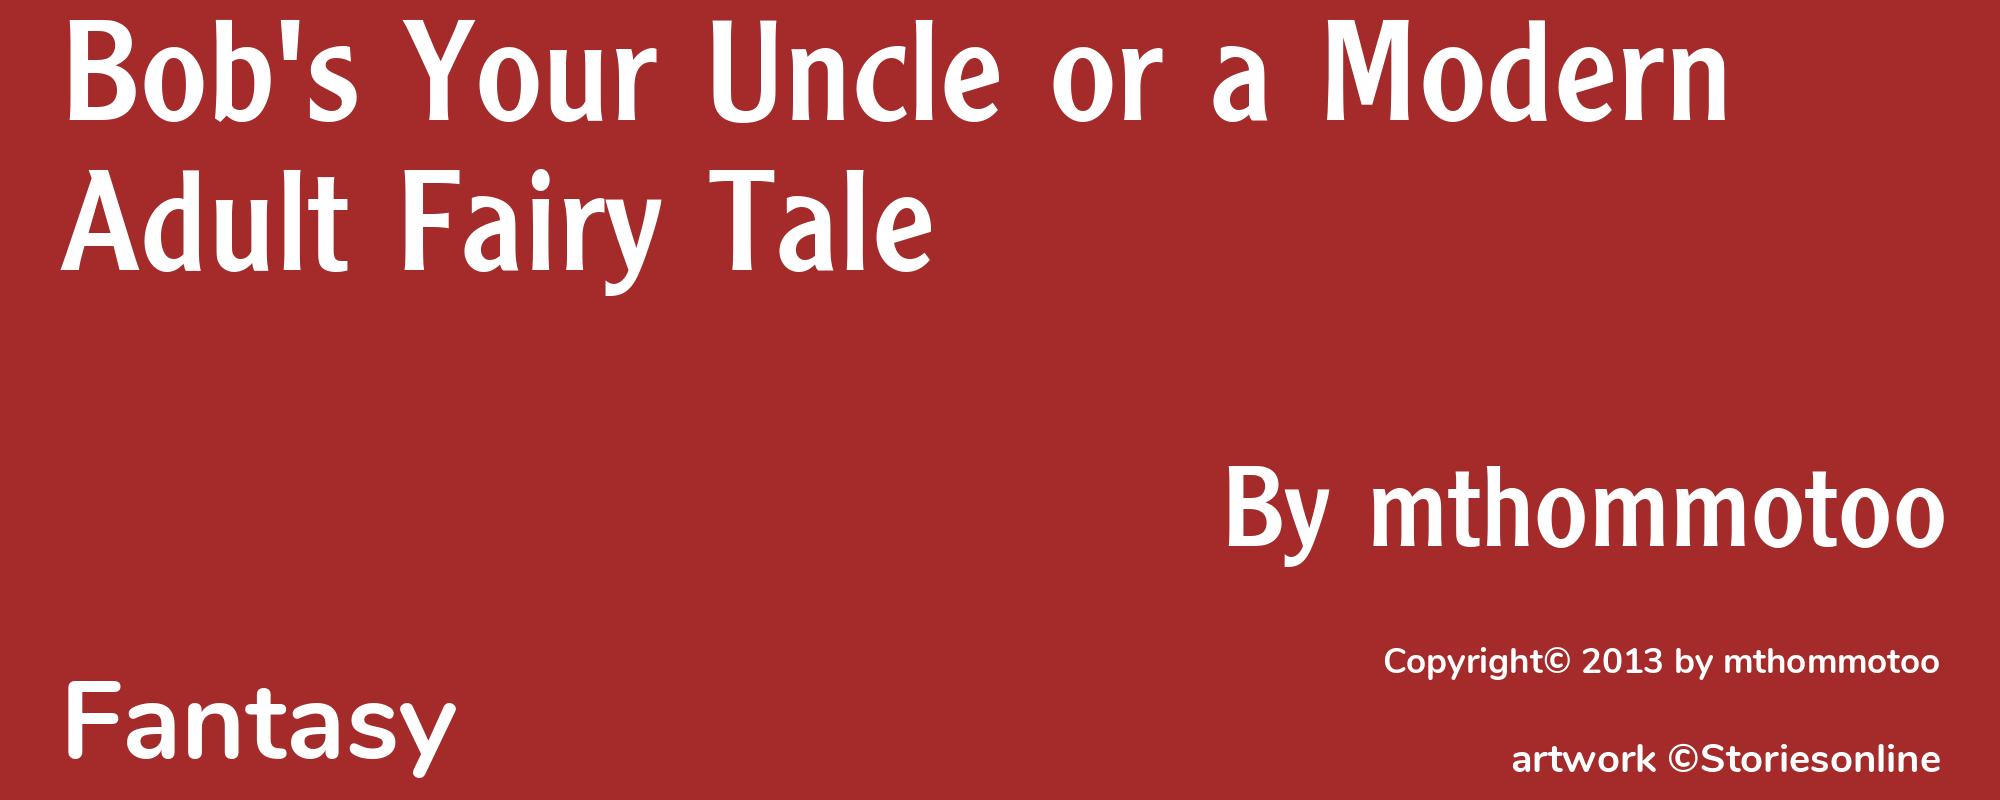 Bob's Your Uncle or a Modern Adult Fairy Tale - Cover